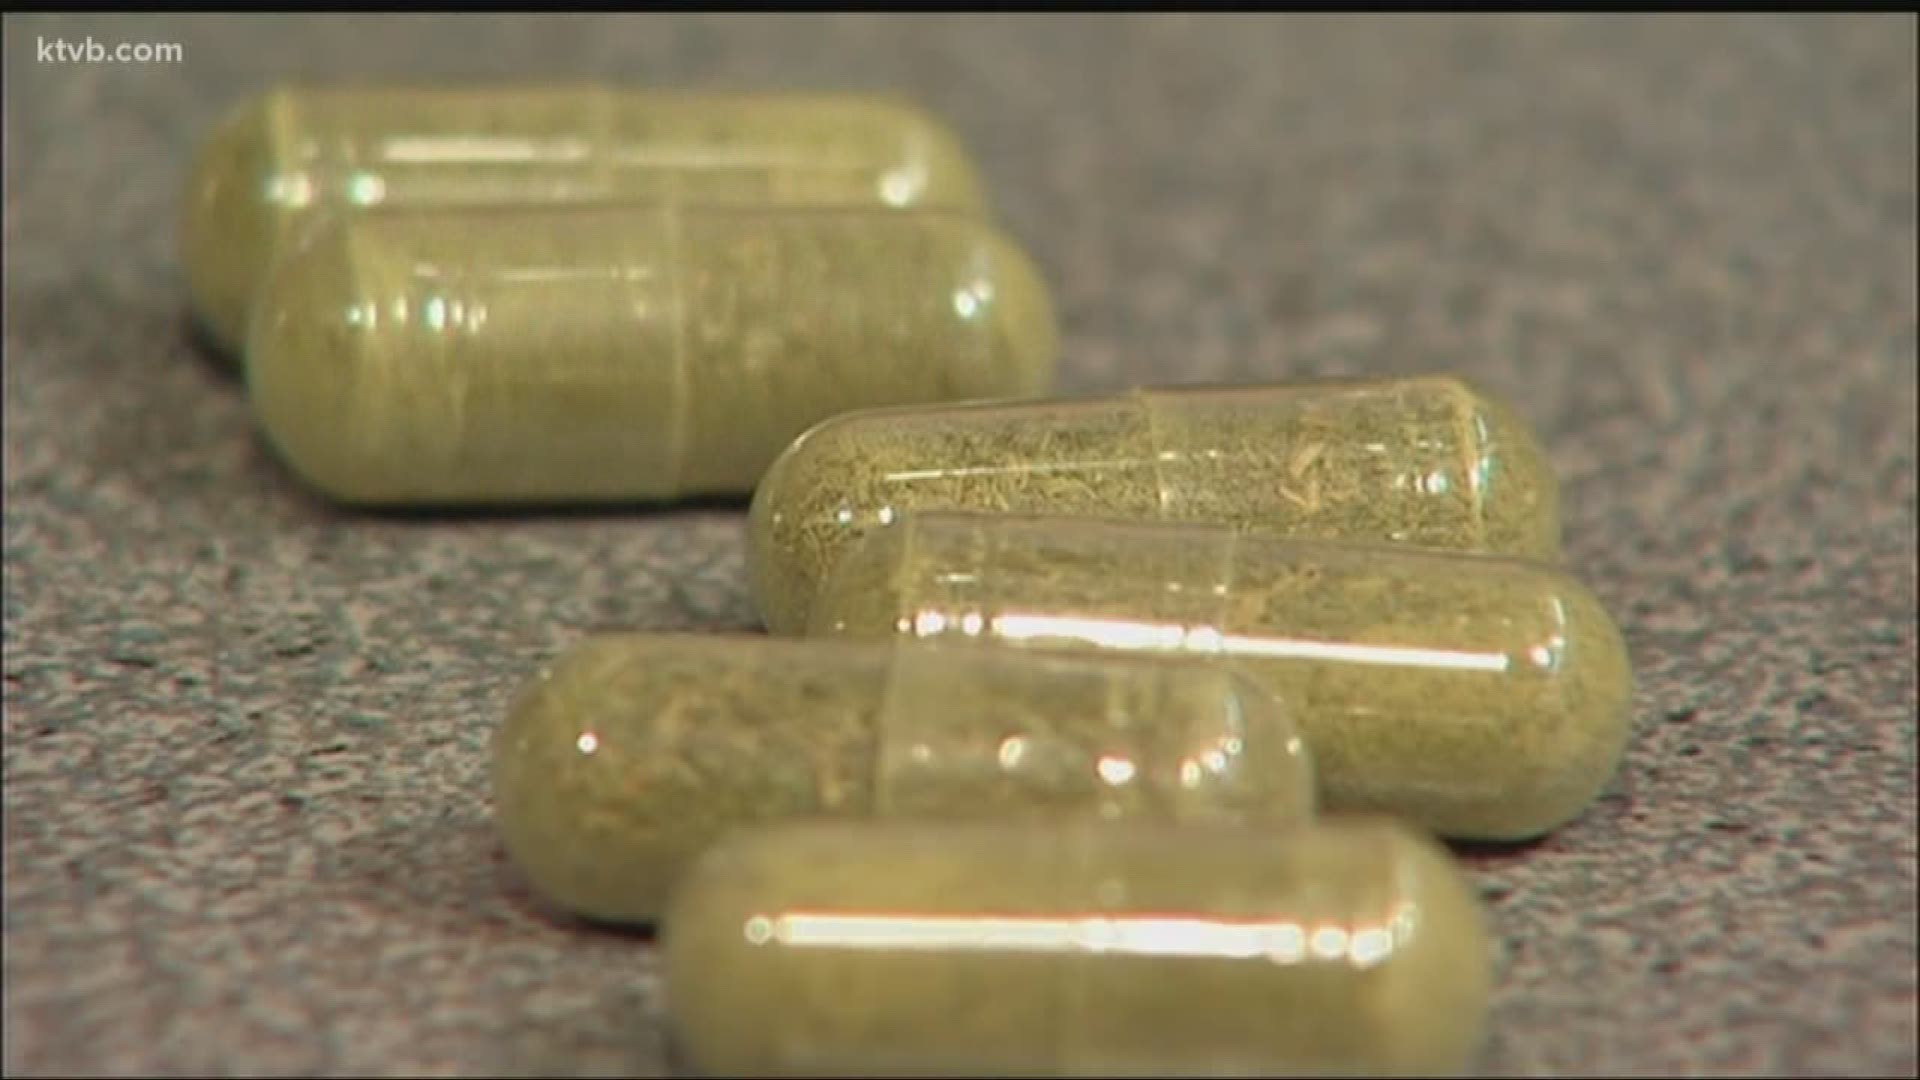 Health officials are urging people to avoid using all kratom products.